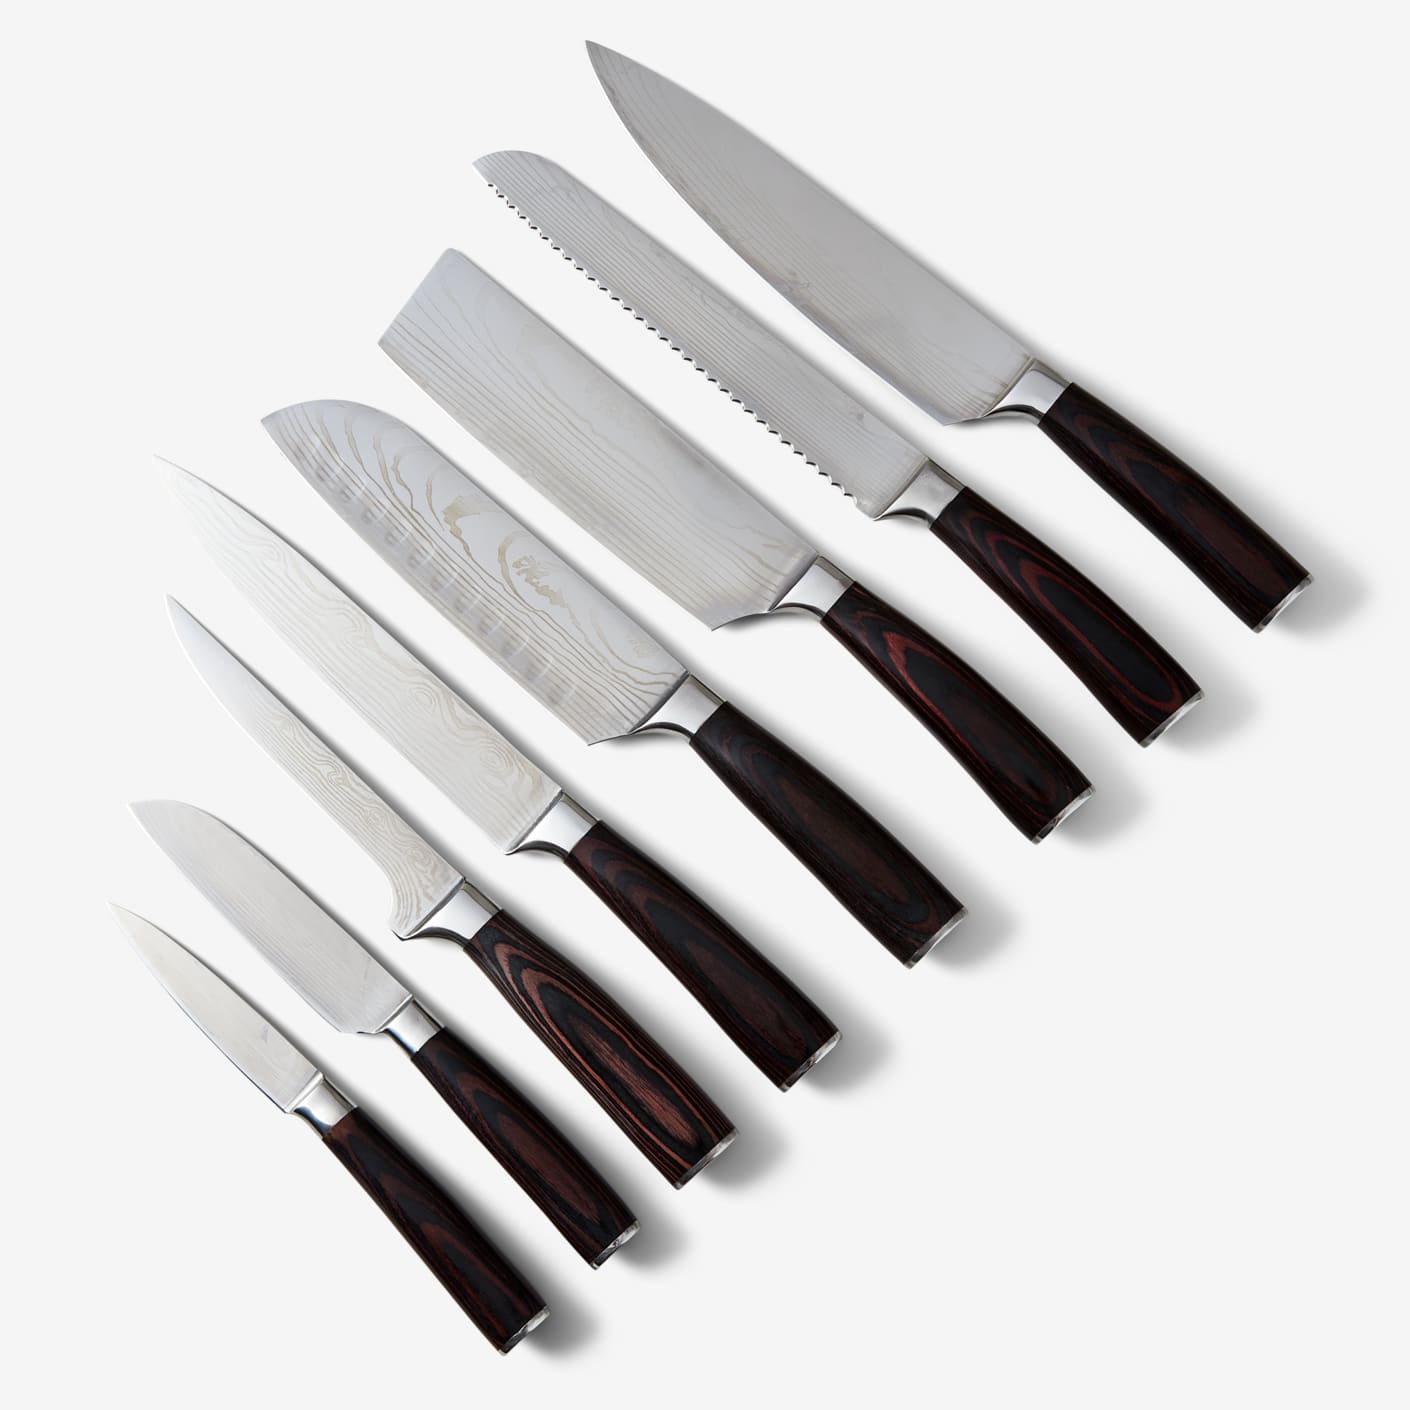 Stainless Steel Kitchen Knives – Set of 8